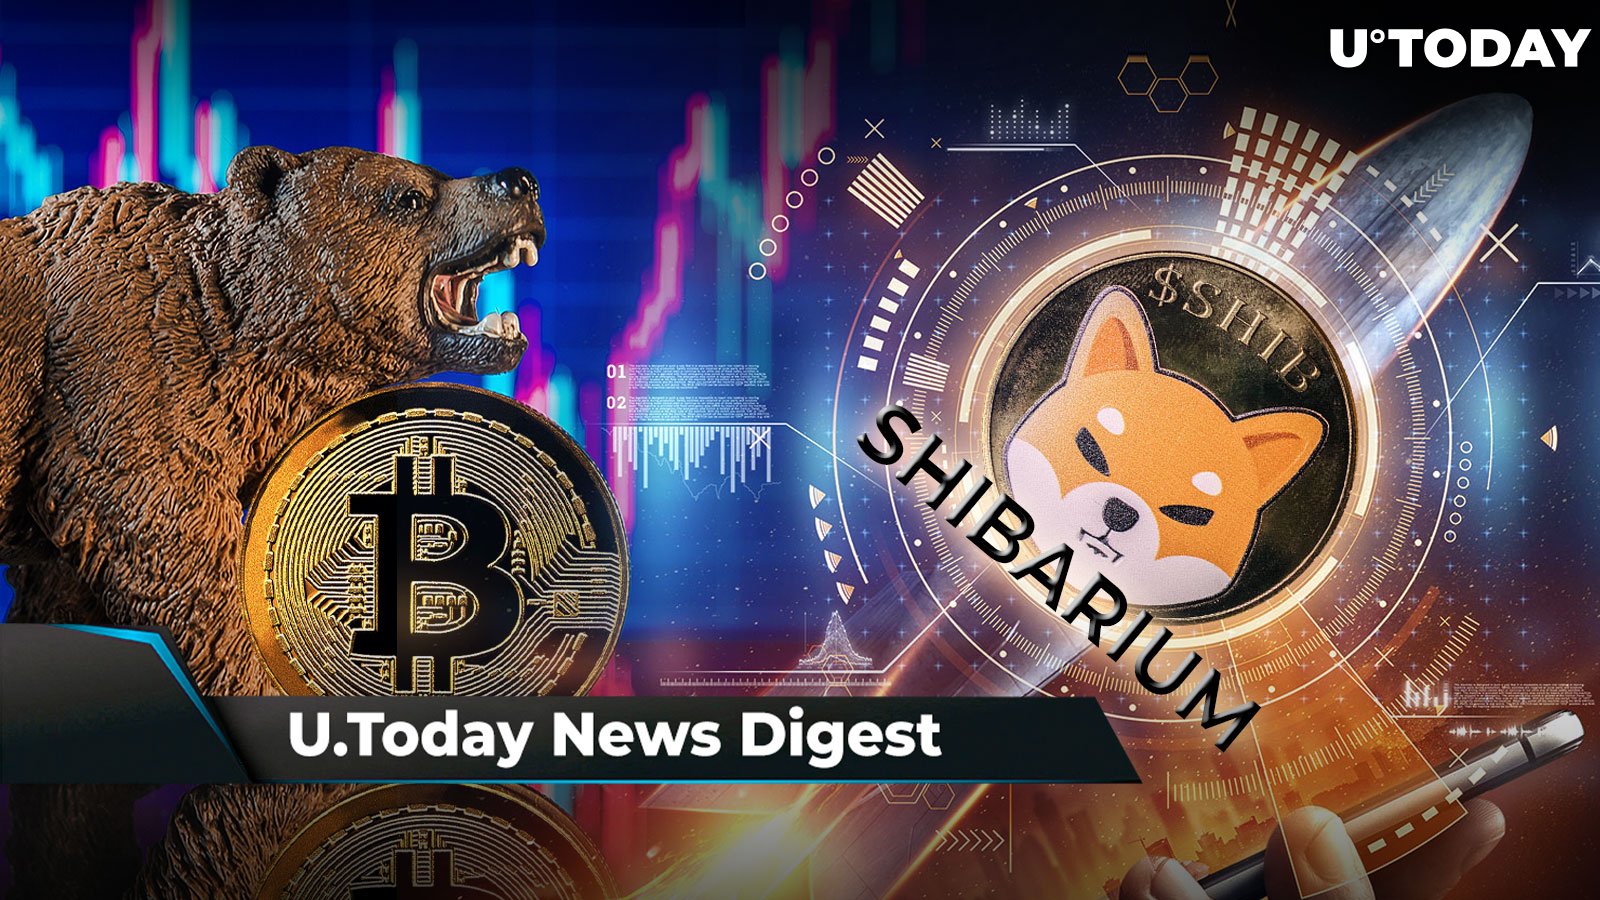 Ripple Ally Final Judgment Out, Bitcoin Bear Market Over, Shibarium Utility Soars to New All-Time High: Crypto News Digest by U.Today